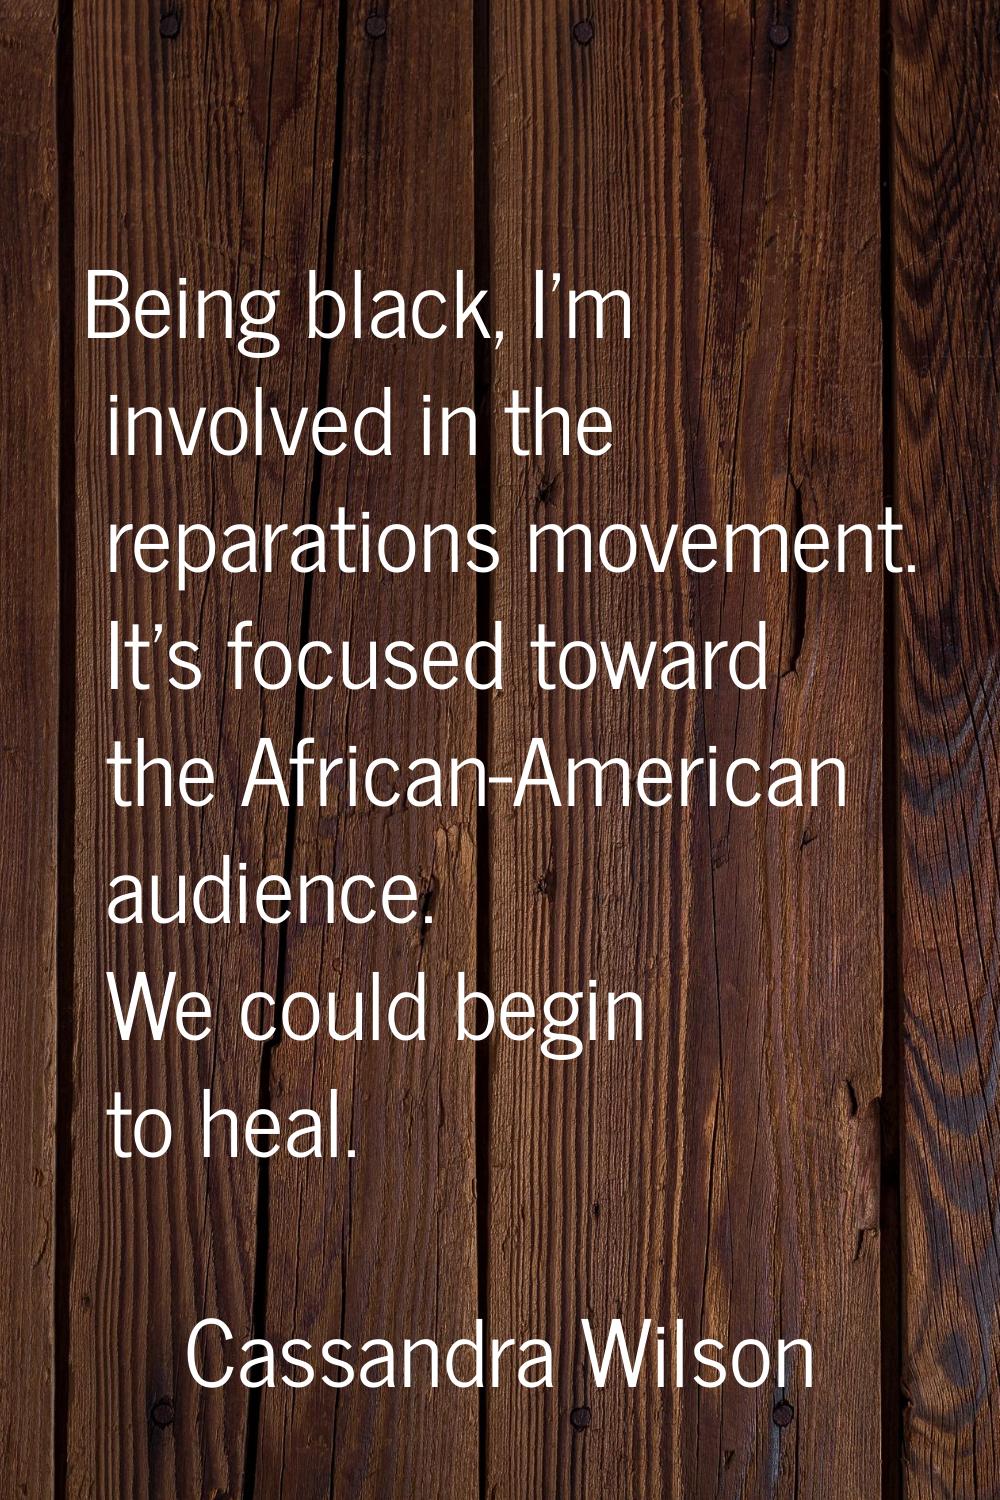 Being black, I'm involved in the reparations movement. It's focused toward the African-American aud